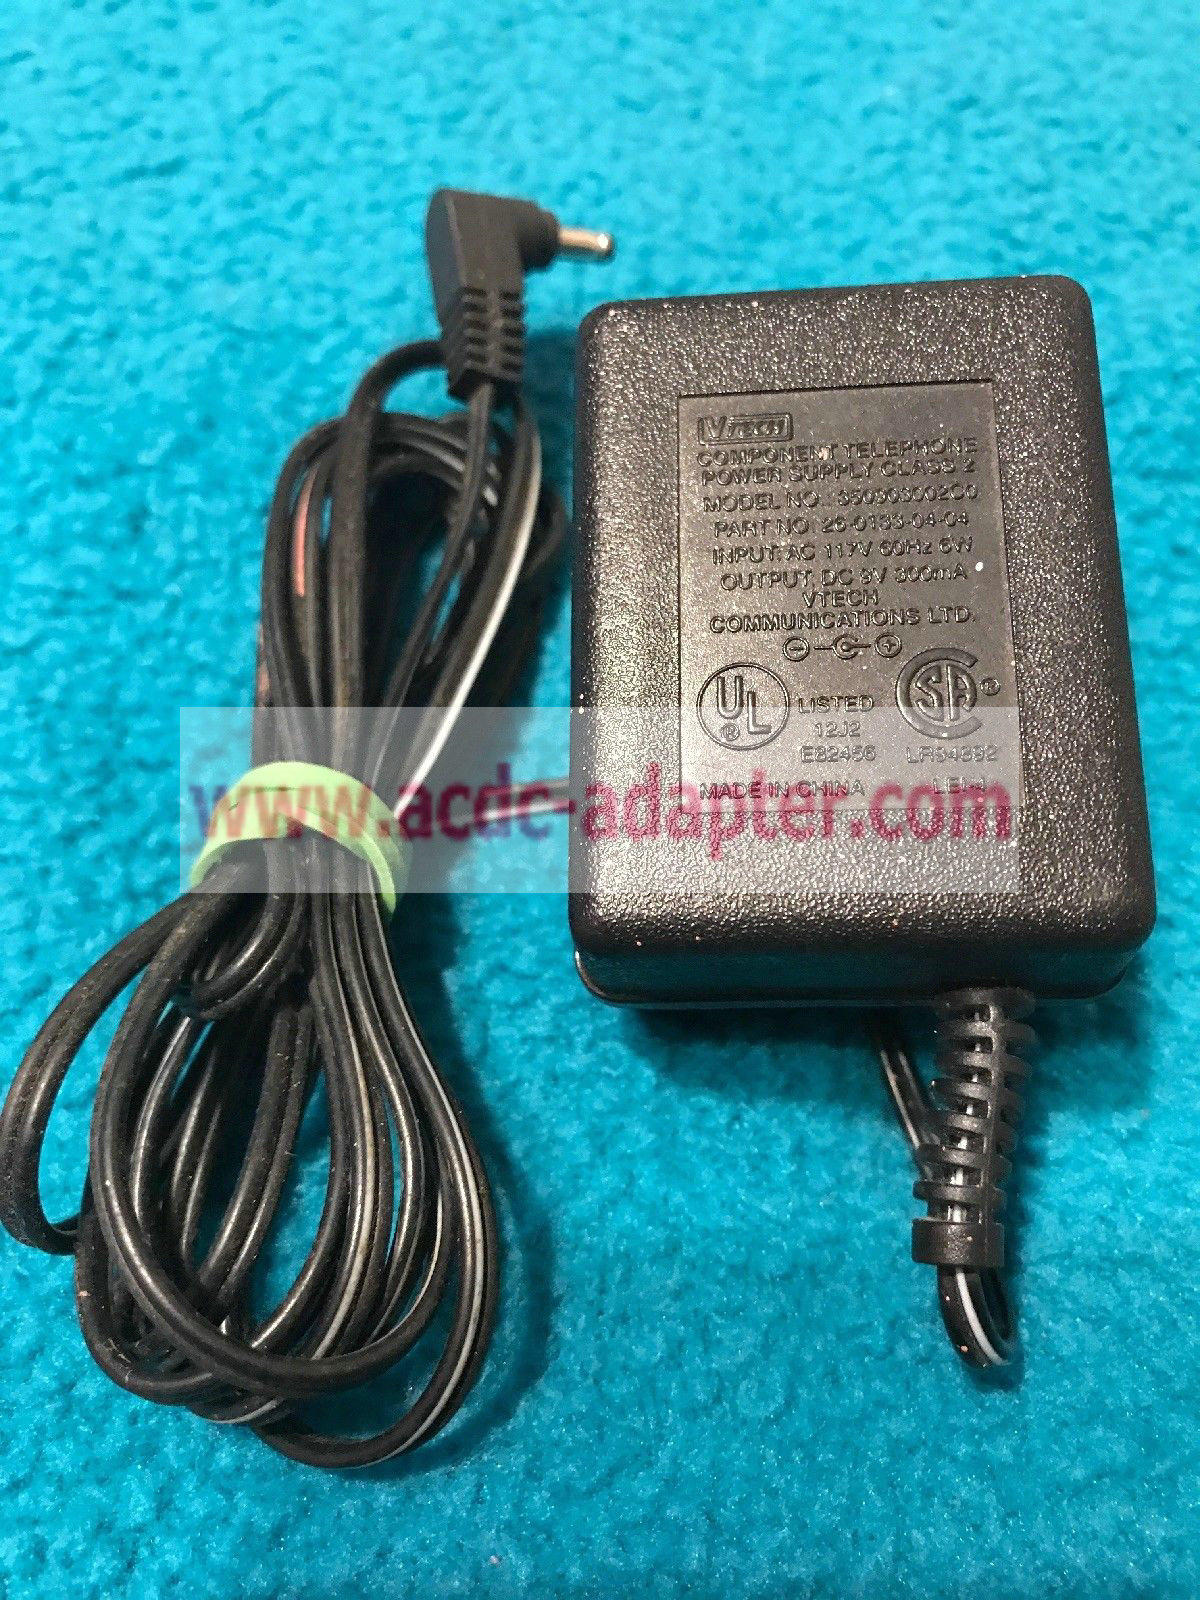 9V 300mA VTECH 350903002C0 AC Power Supply Adapter 26-0130-04-04 Charger